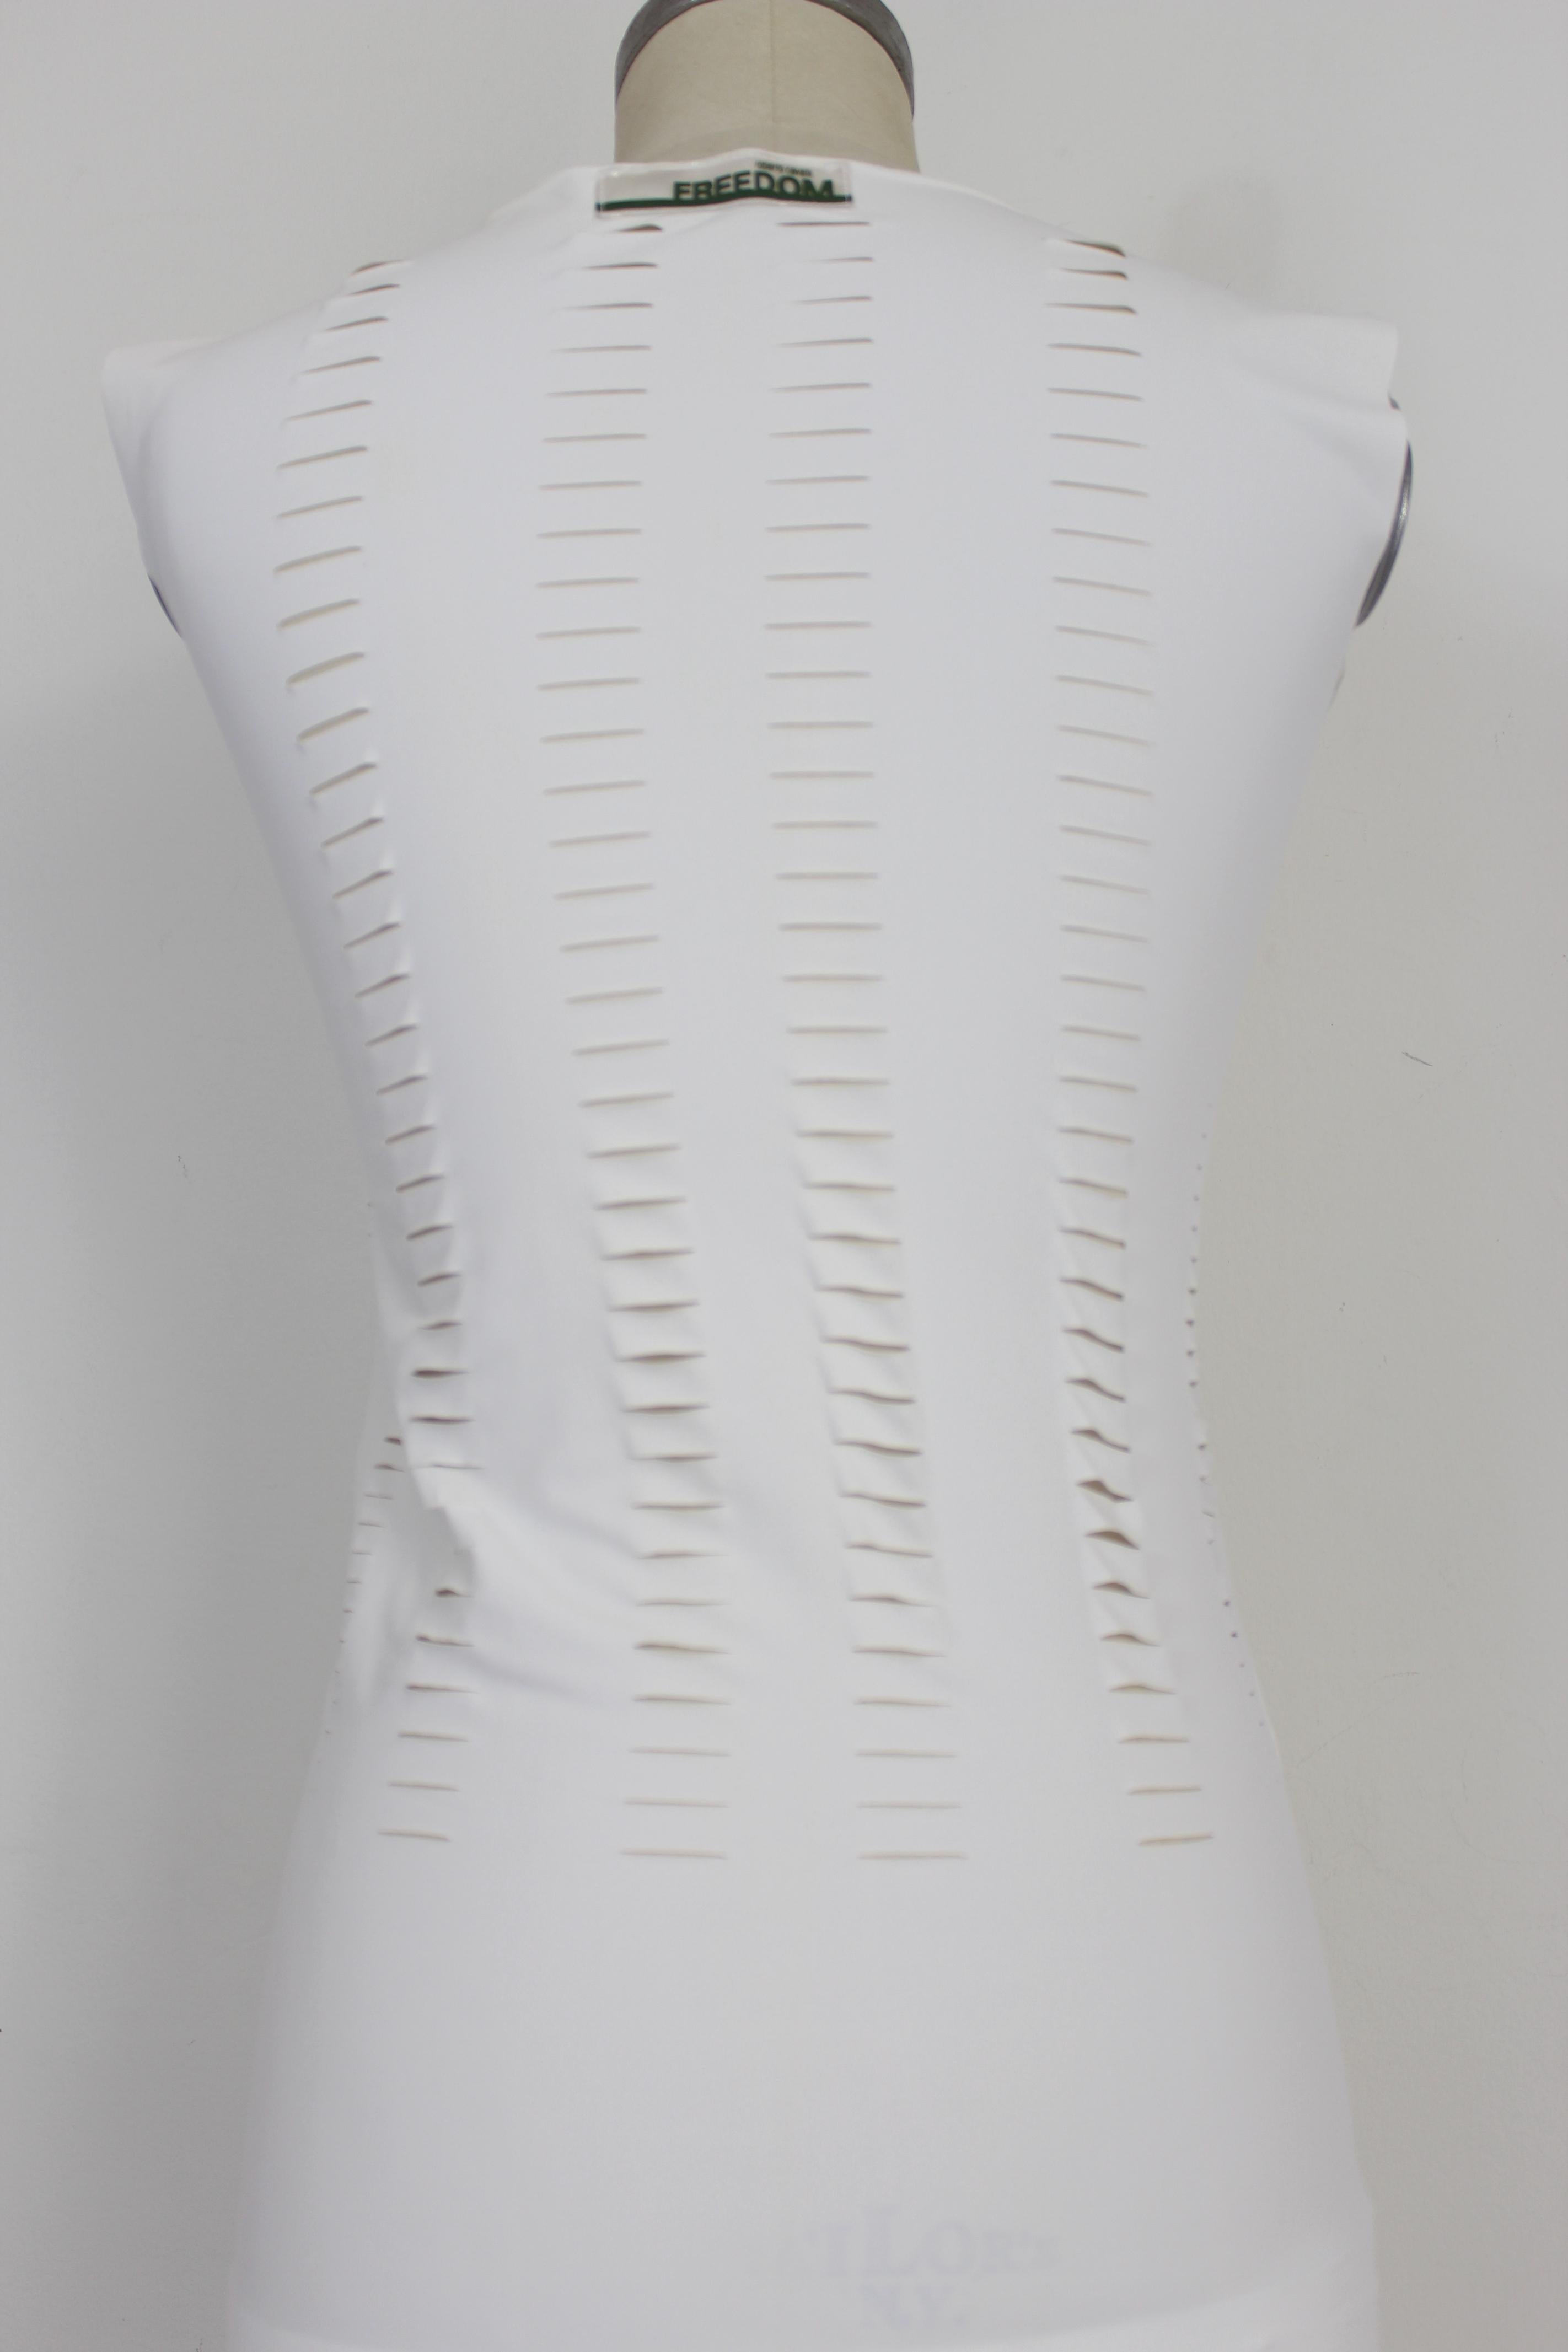 Cavalli White Laser Cut Sheath Fitted Party Dress 2000s 1